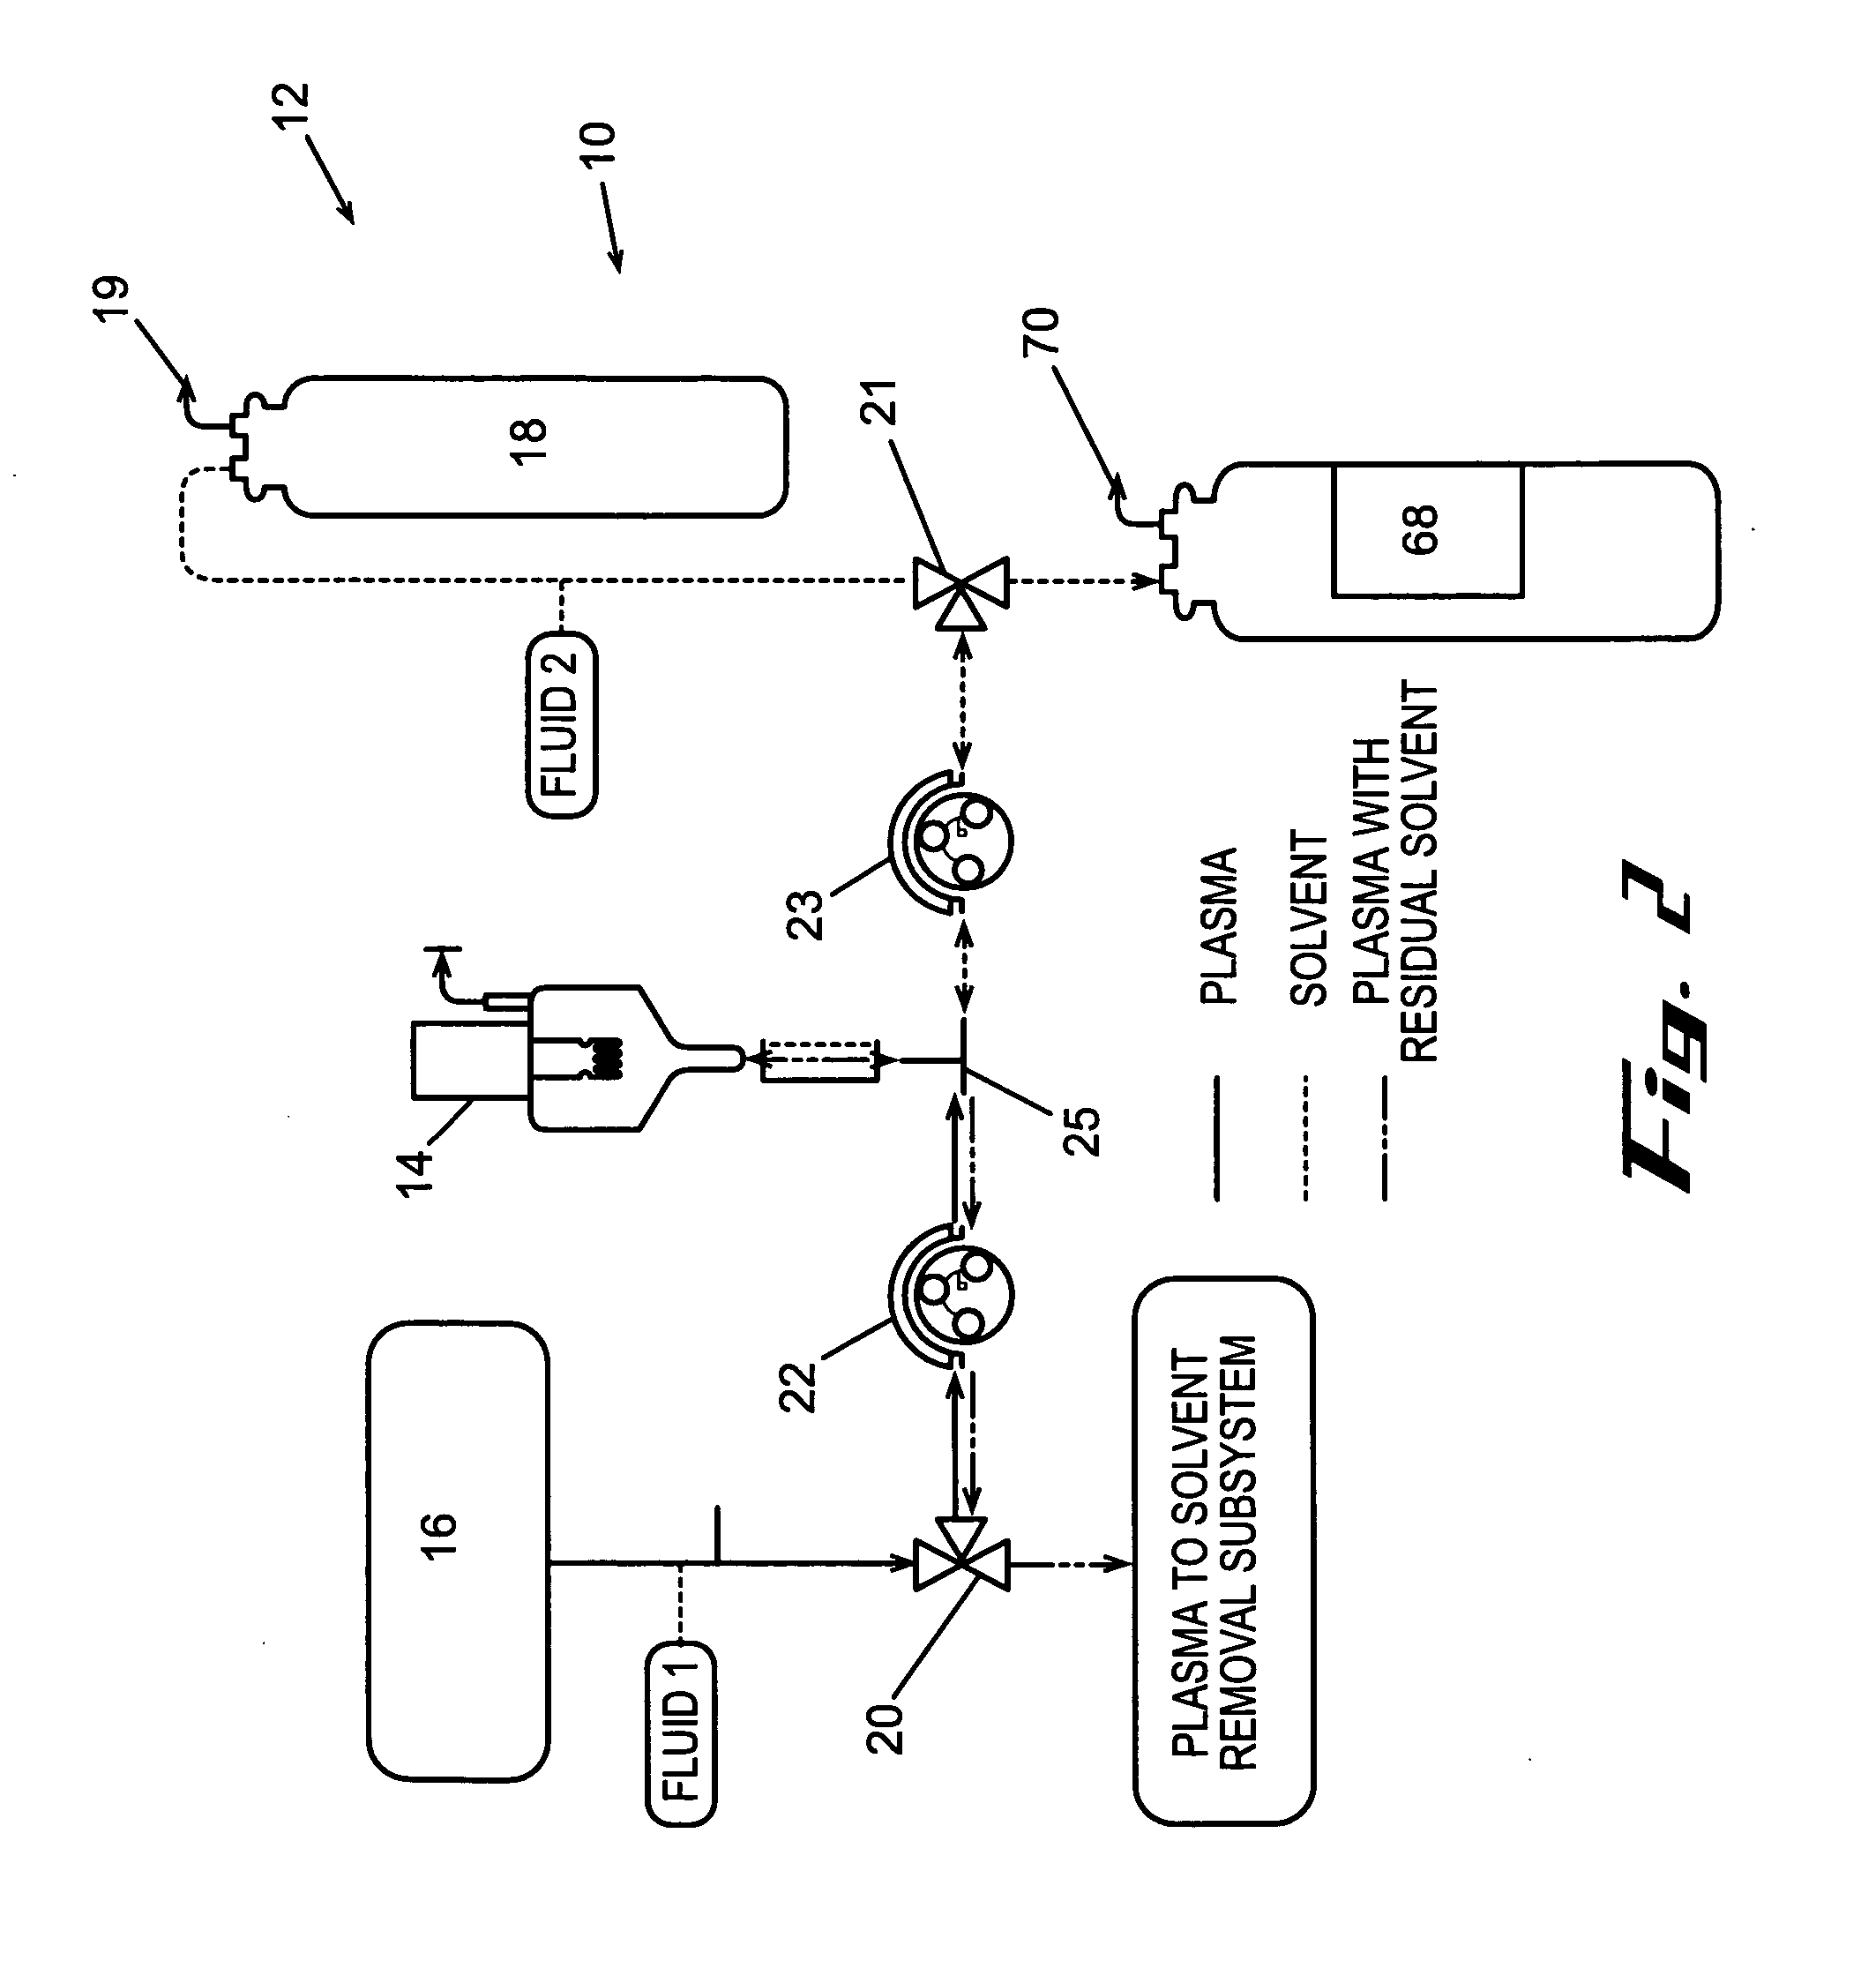 Systems and methods using a solvent for the removal of lipids from fluids